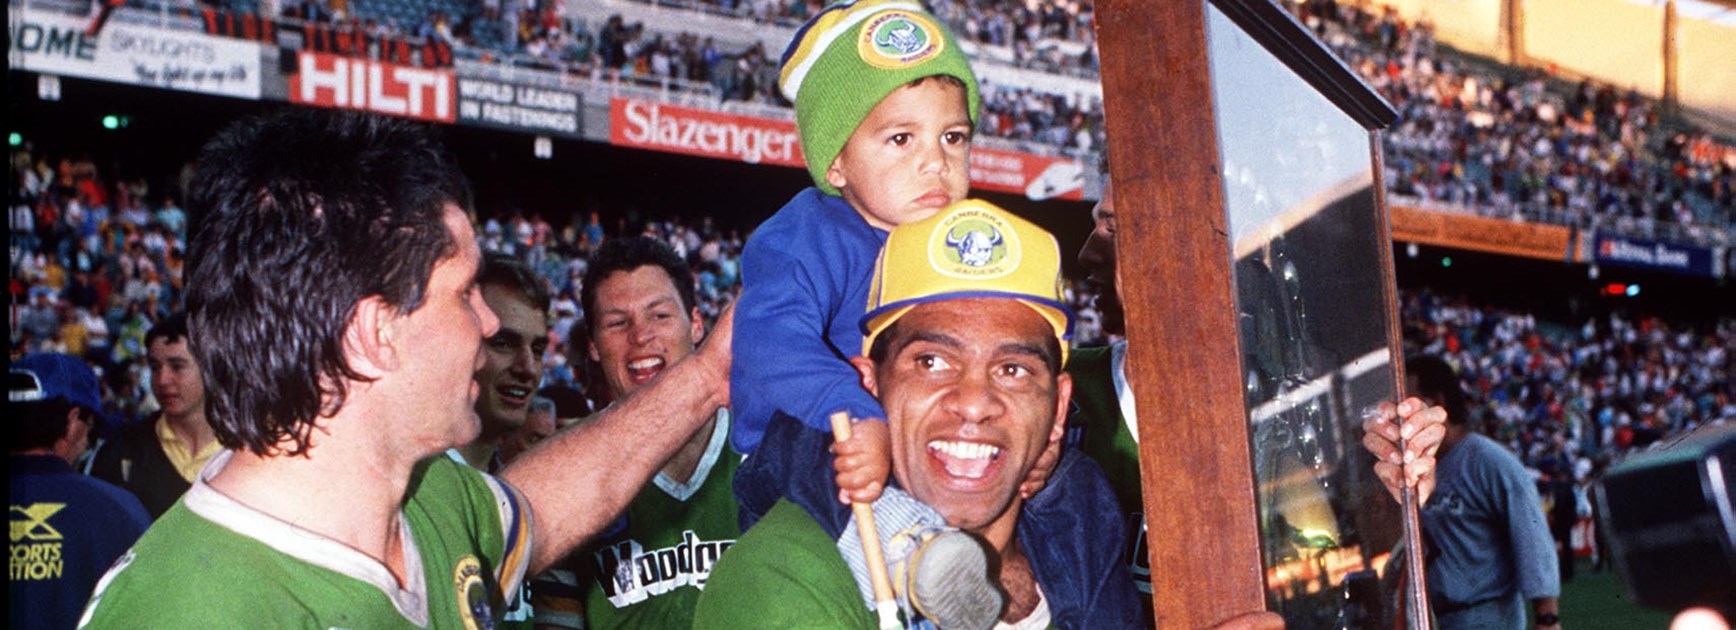 Raiders winger John Ferguson savours the spoils of victory with his son and five-eighth Chris O'Sullivan.